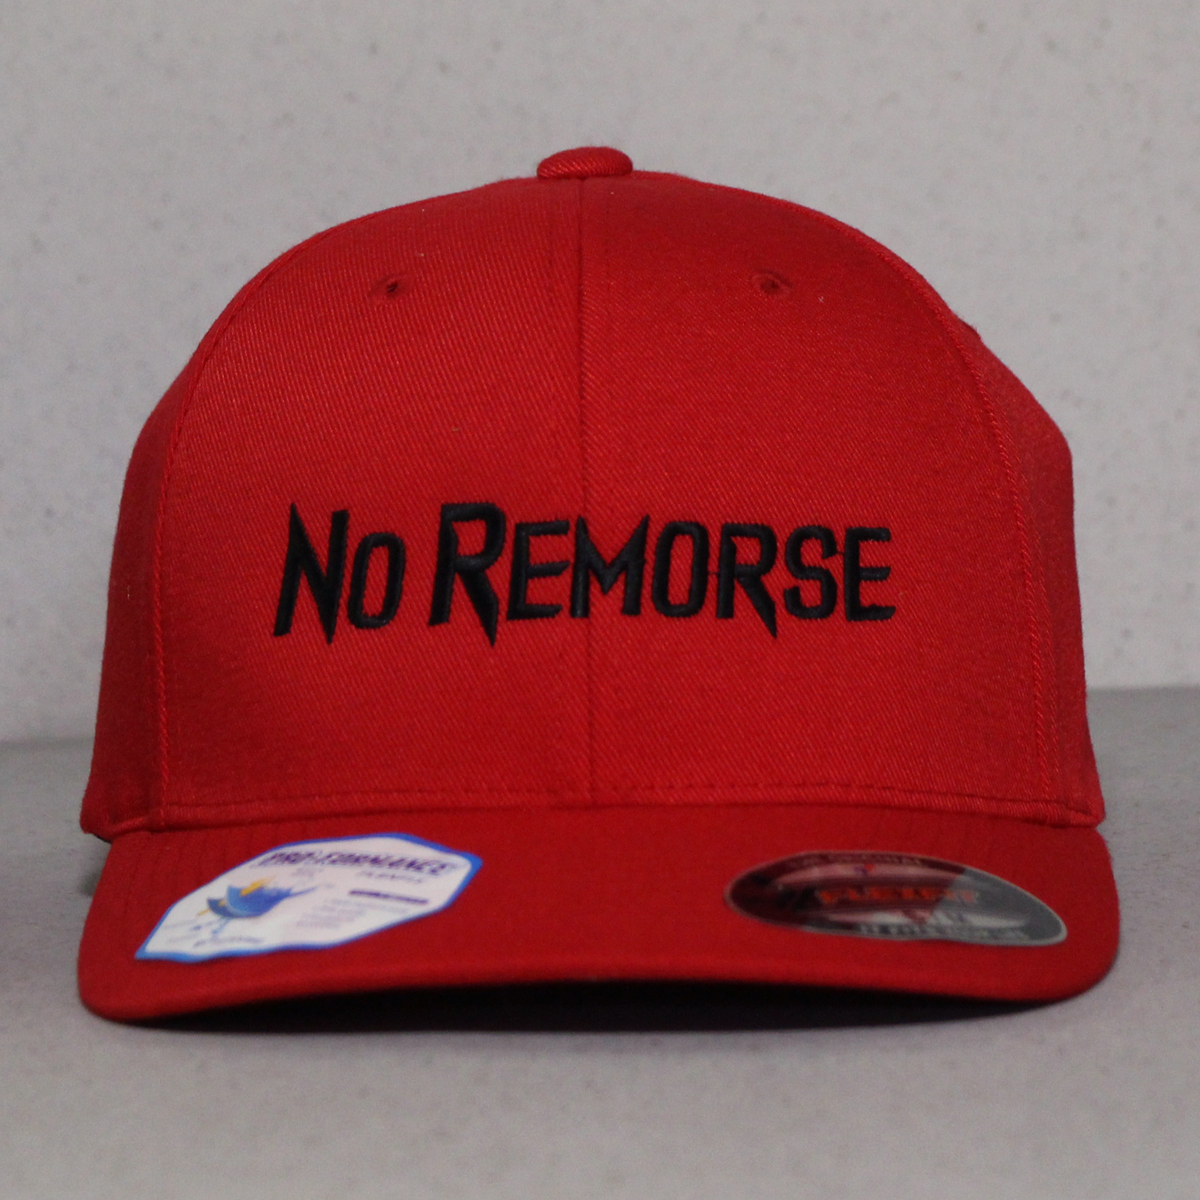 No Remorse Biker Hat - Red with Black Letters